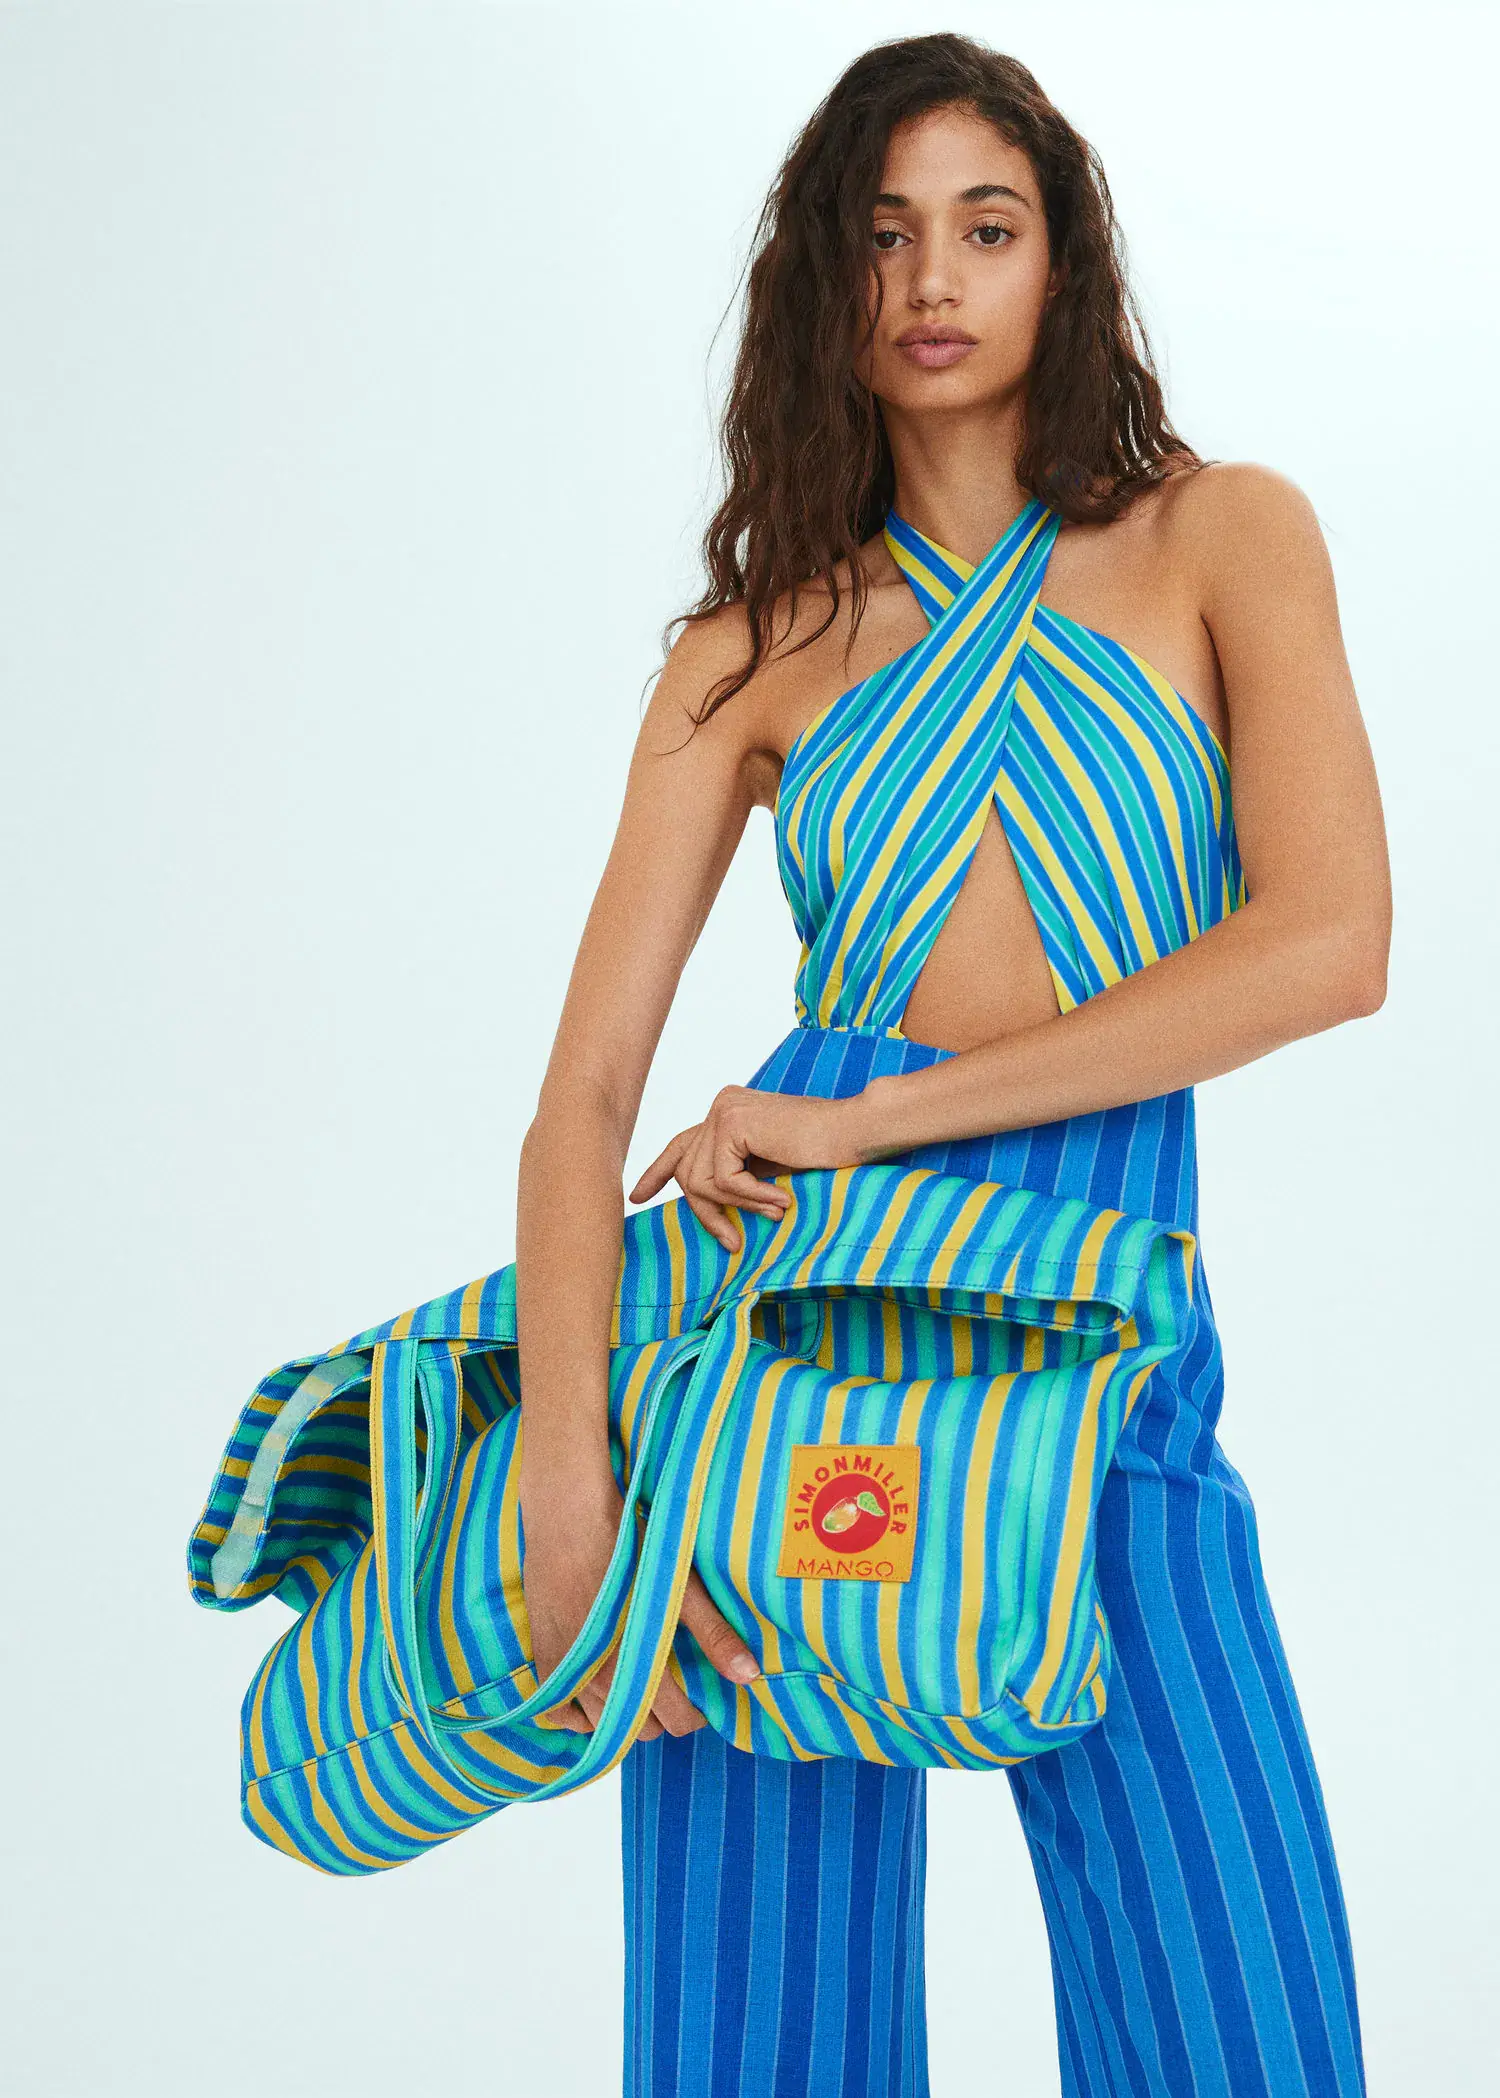 Mango Multi-colored striped maxi bag. a woman in a blue and yellow striped outfit. 